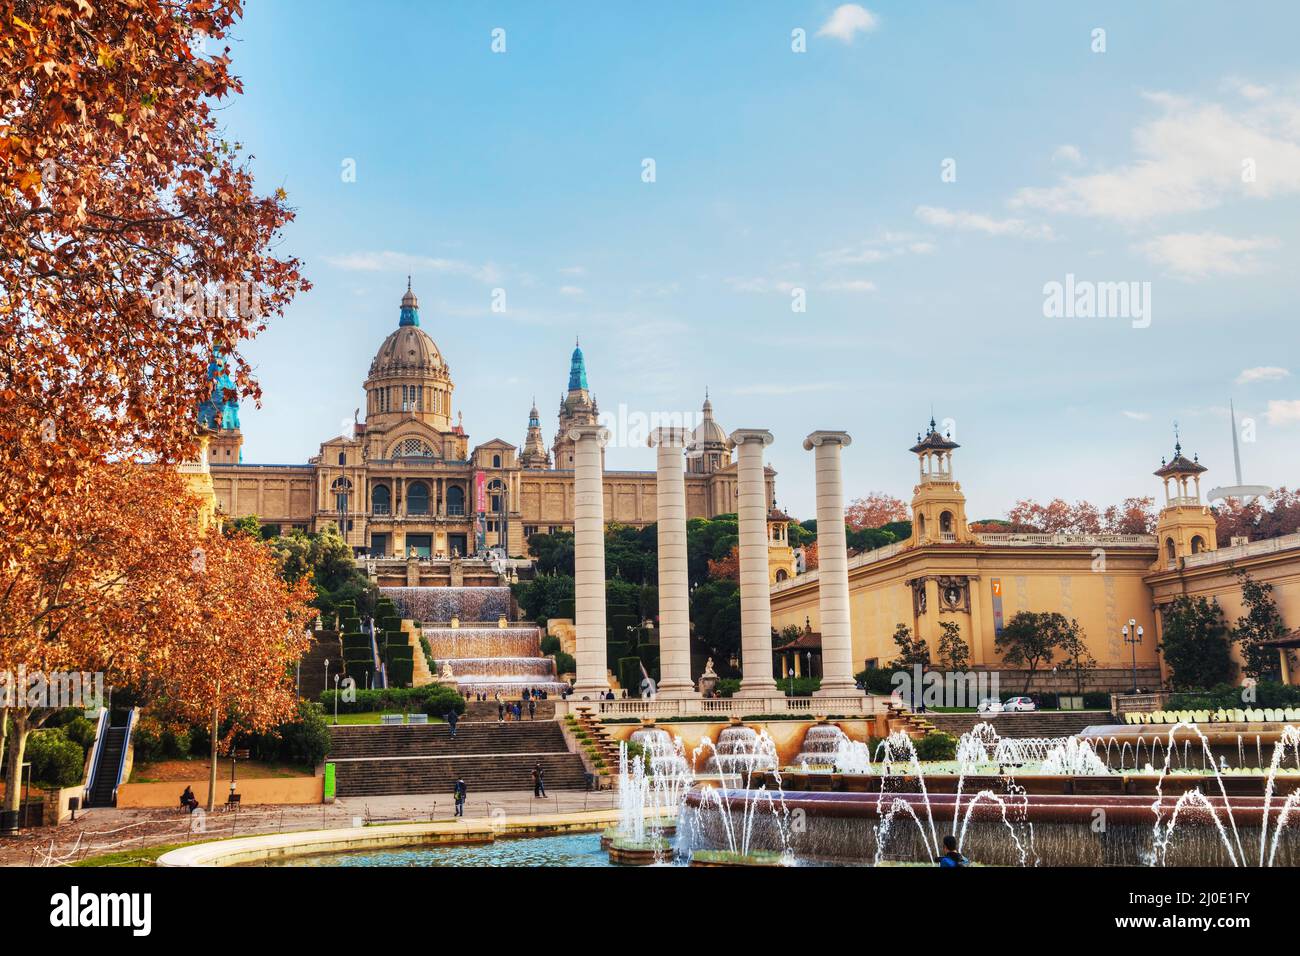 Montjuic hill with people on a sunny day Stock Photo